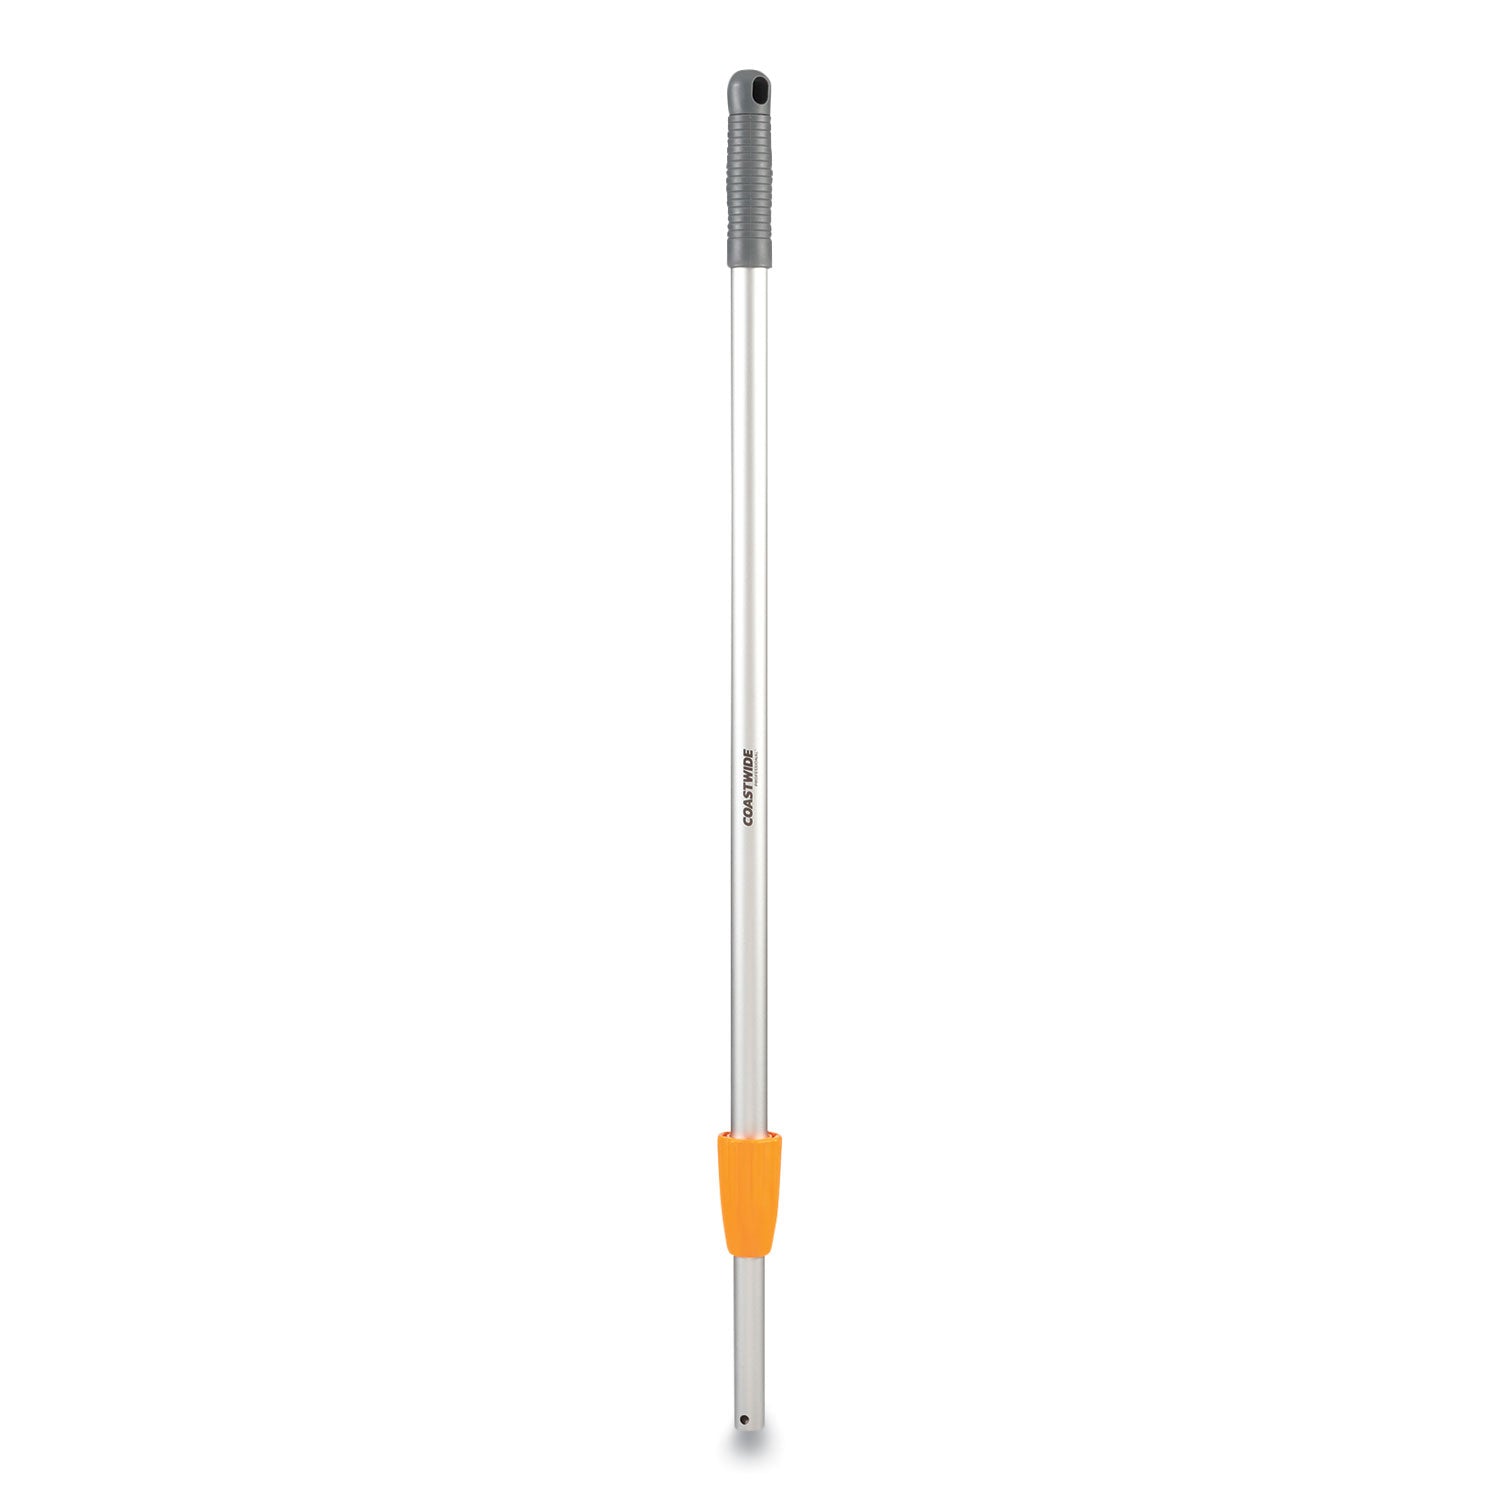 wet-mop-extension-pole-35-to-60-aluminum-handle-gray_cwz24419998 - 1